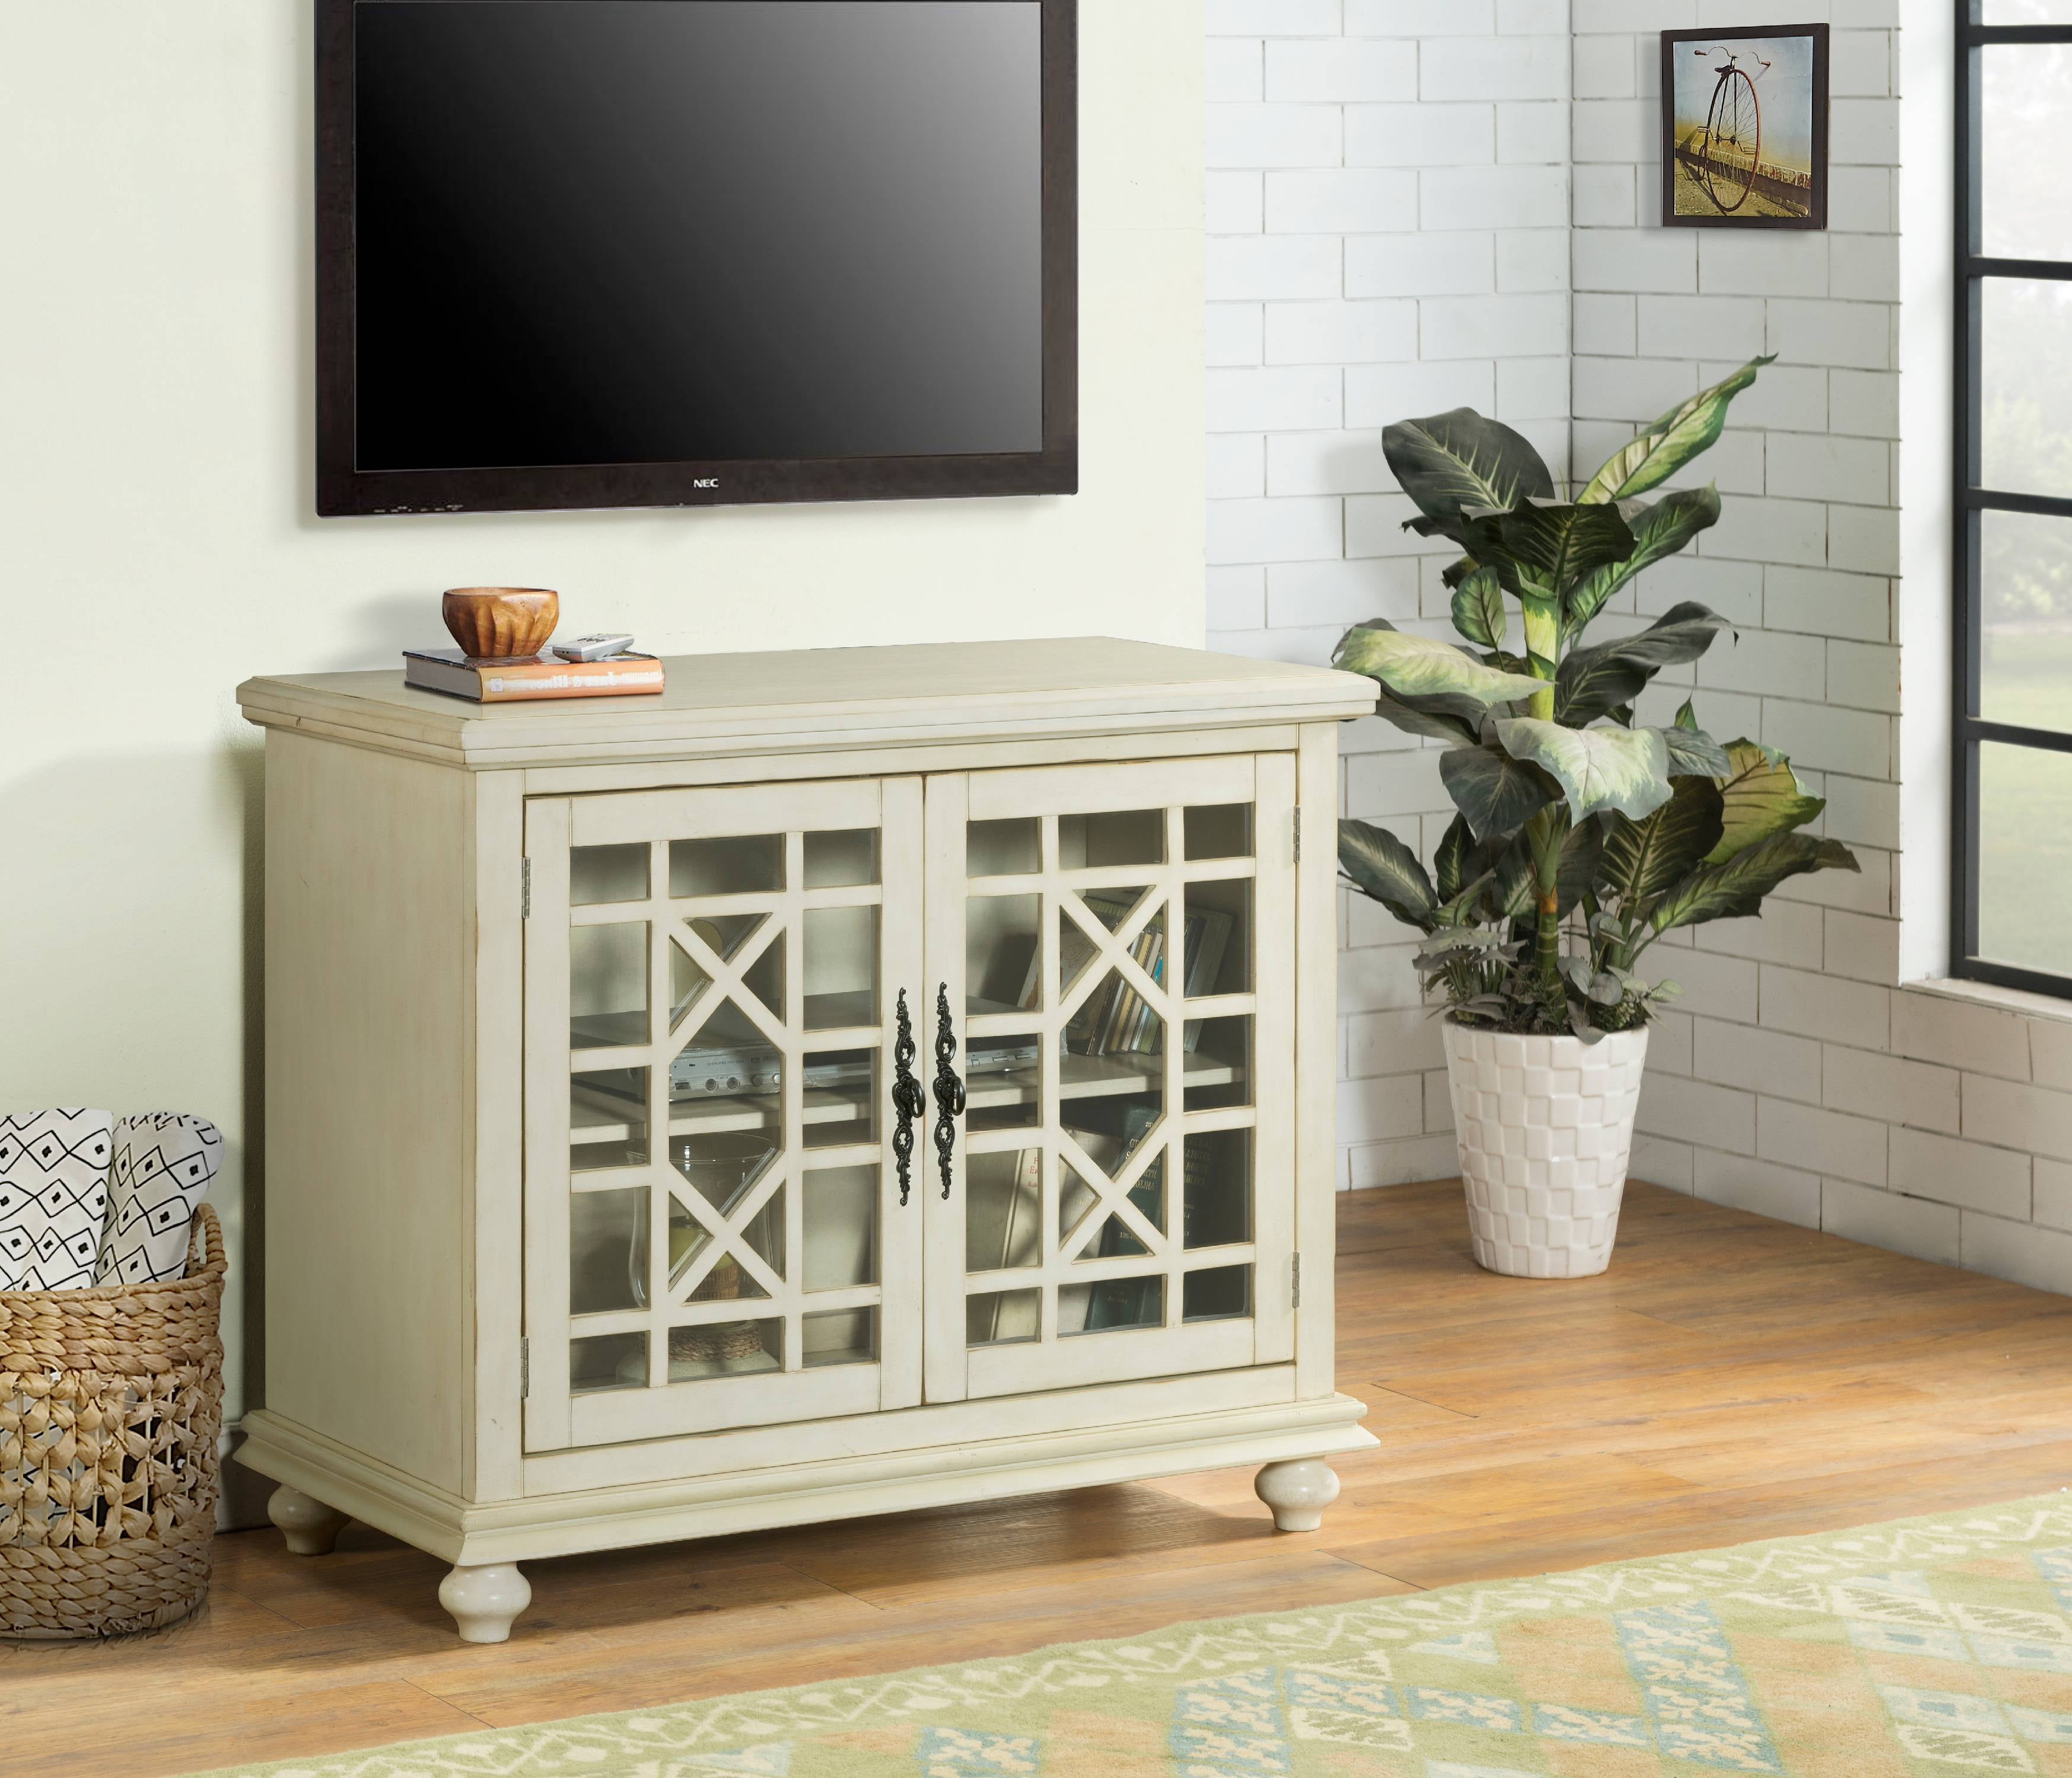 1st Choice Retro Glass Corner Teal Cabinet - Perfect for Small Spaces